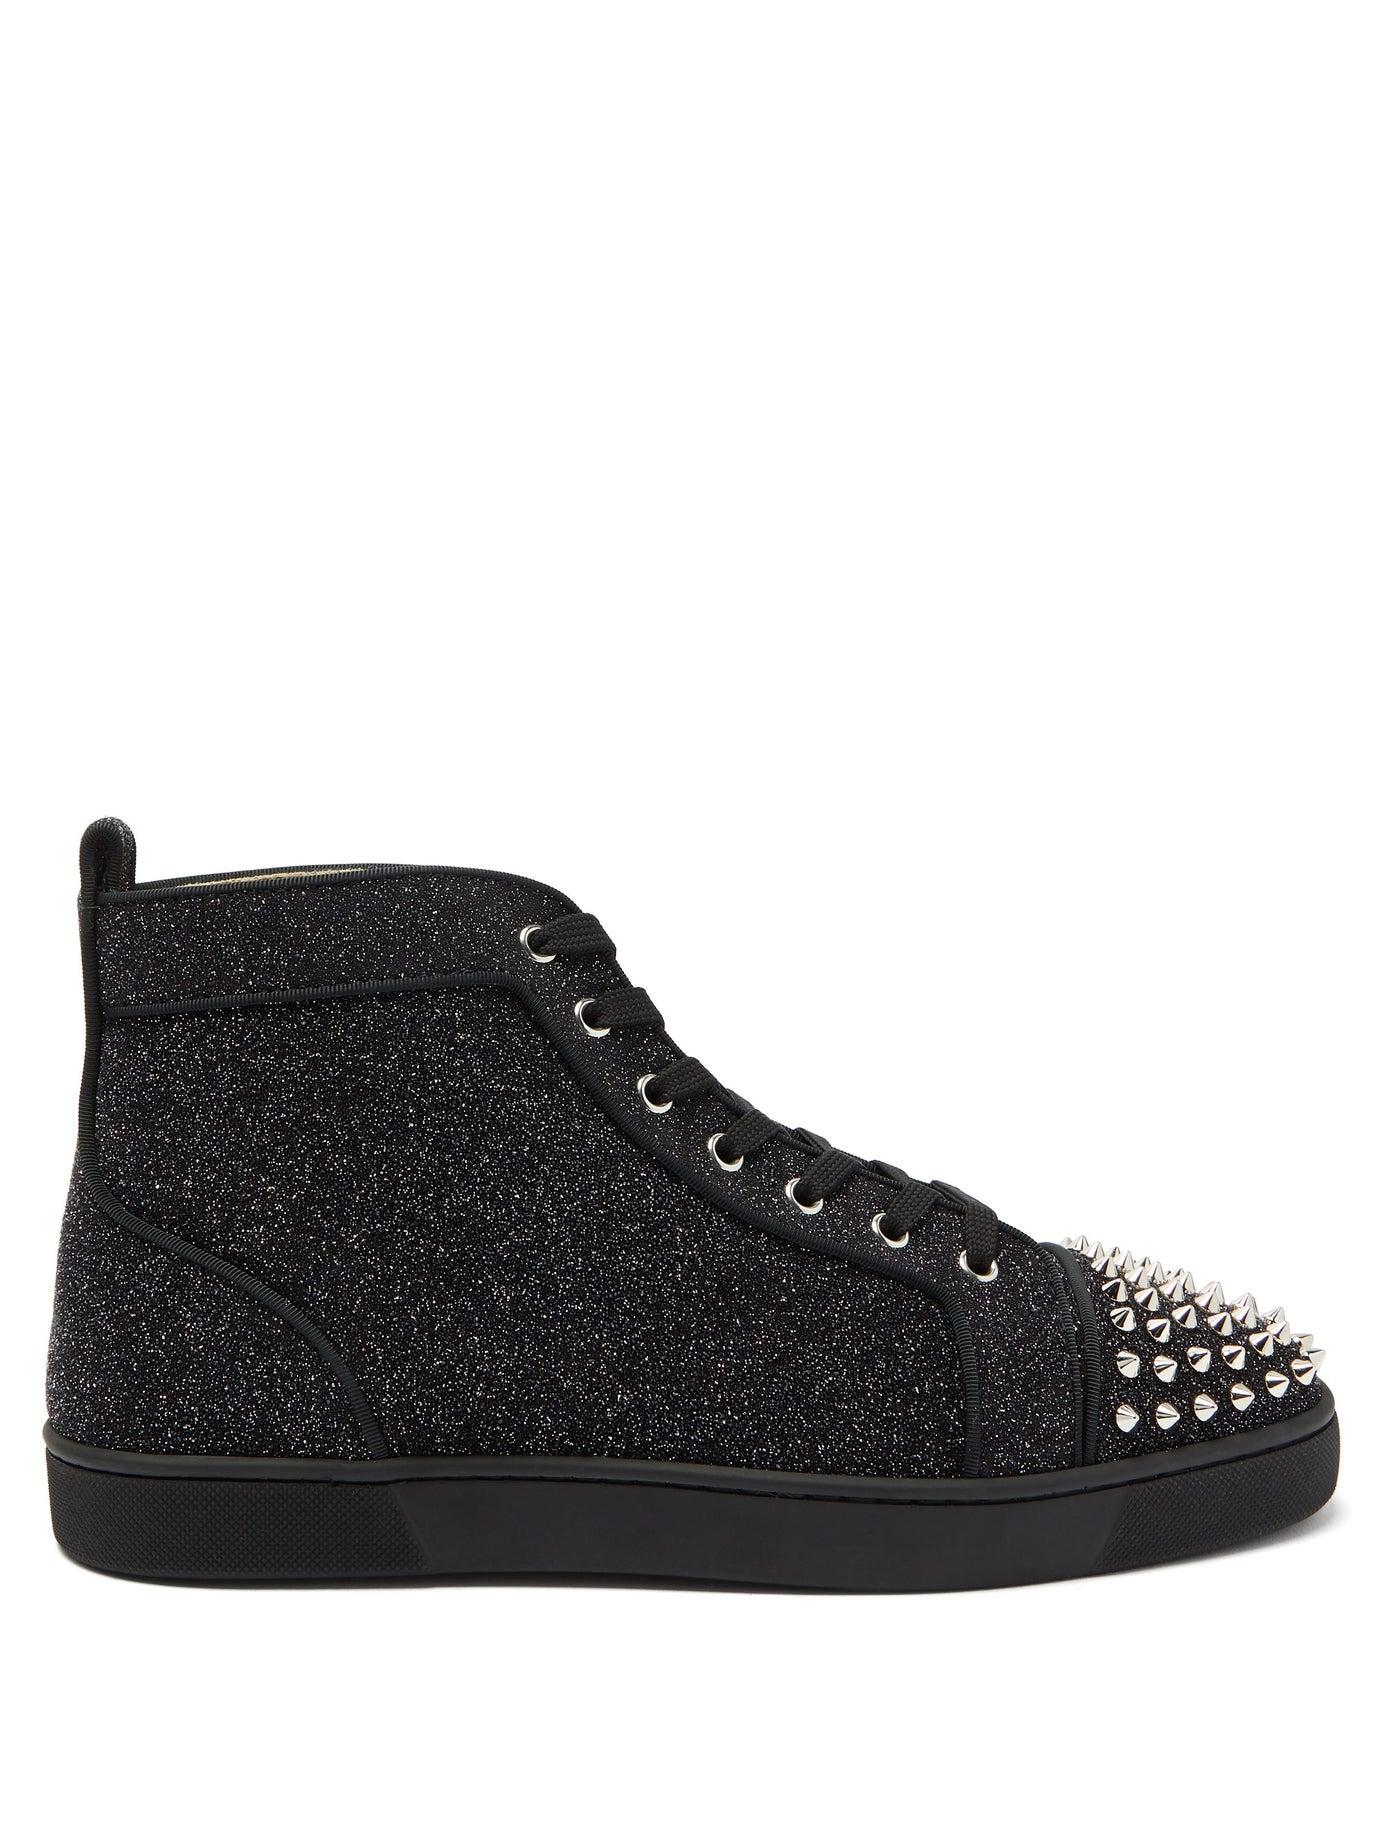 Christian Louboutin Lou Spikes Glitter High-top Trainers in Black Men | Lyst